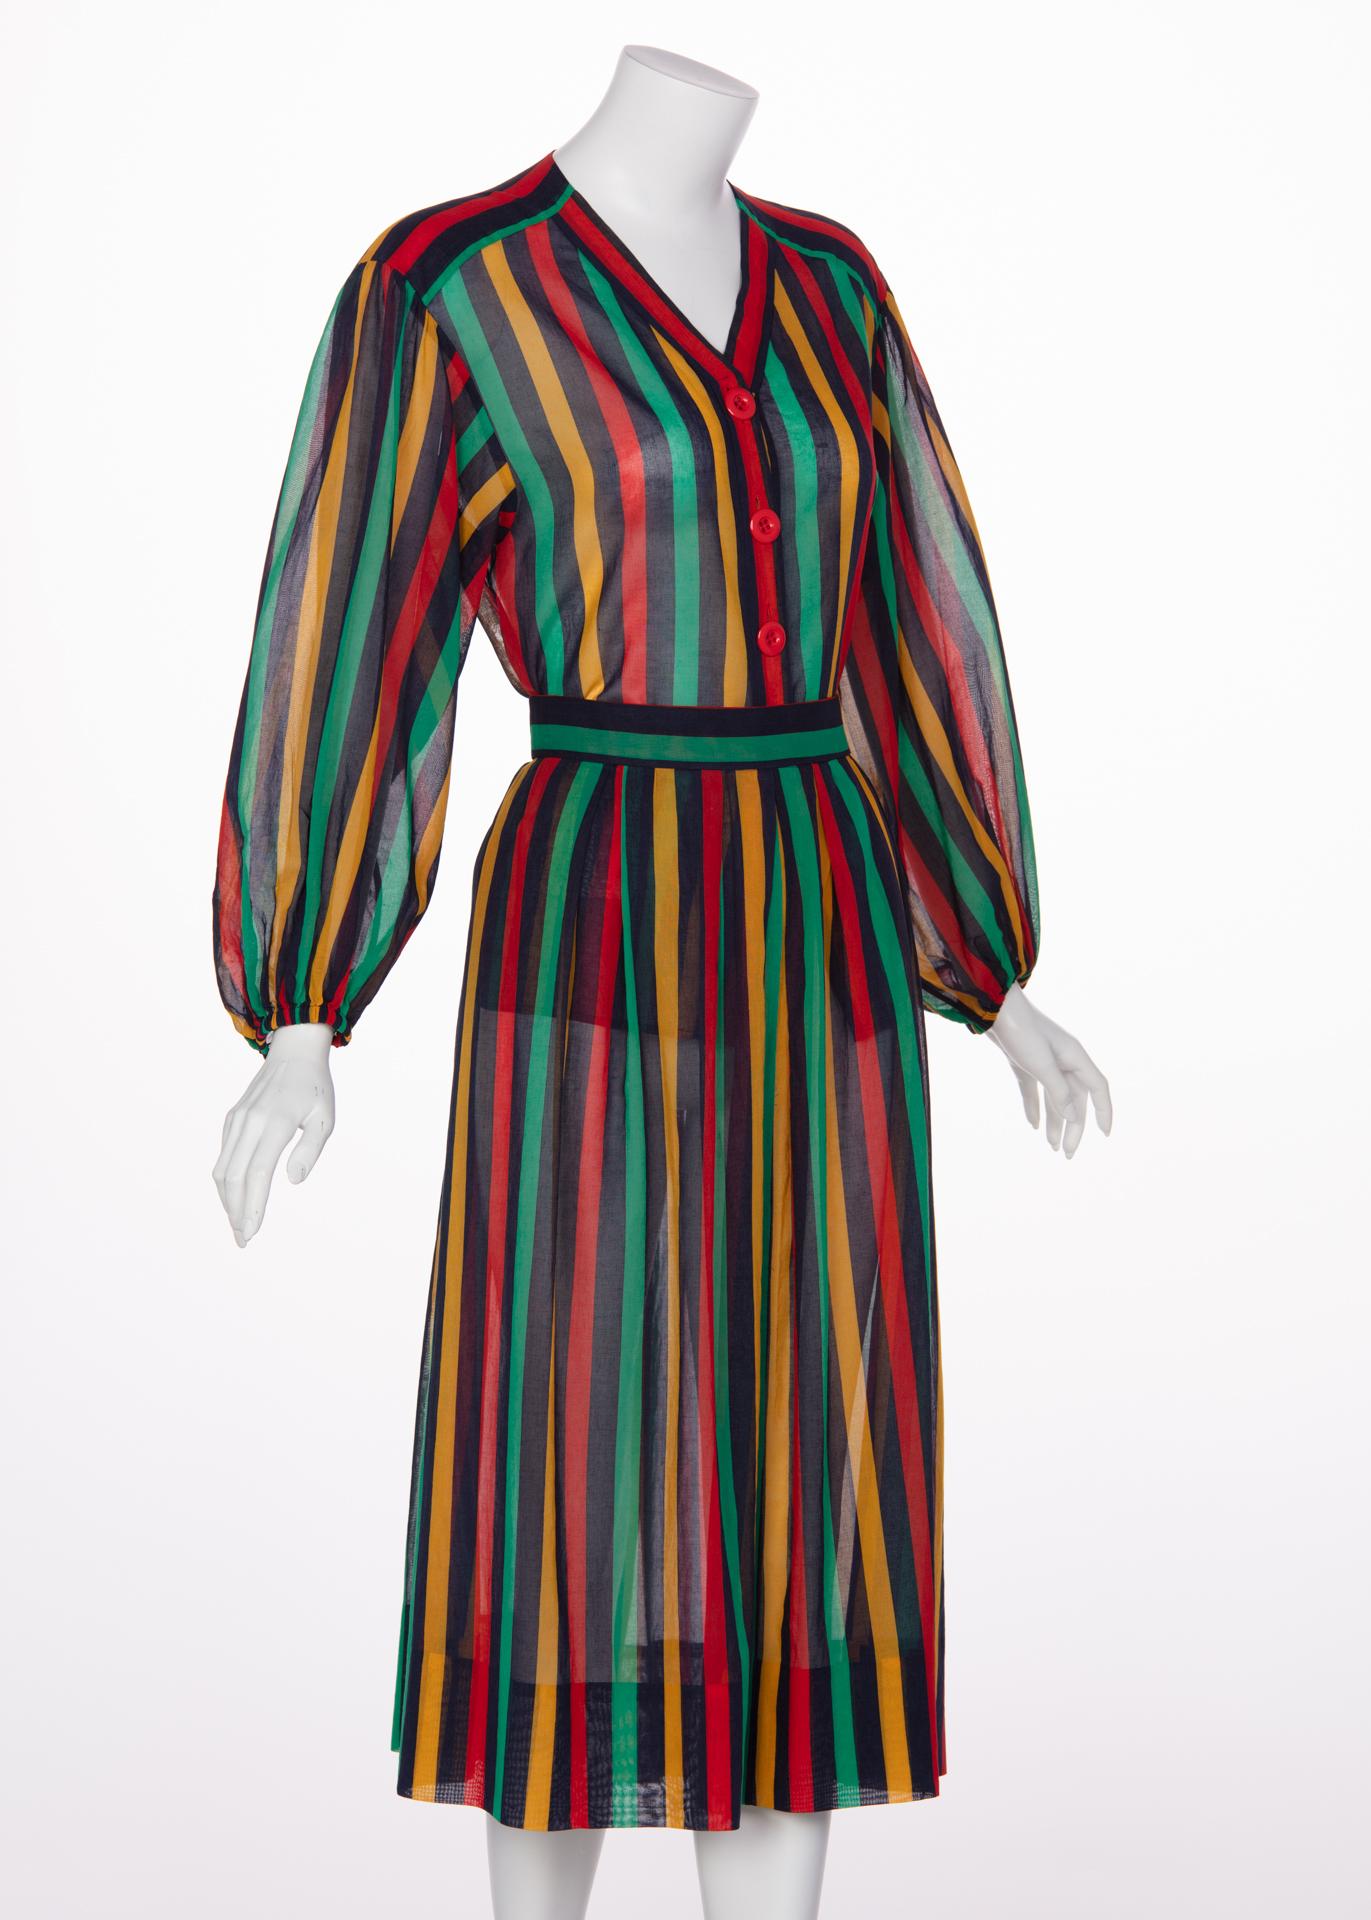 Yves Saint Laurent YSL Red Green Multicolored Striped Blouse / Skirt Set, 1990s  In Excellent Condition In Boca Raton, FL